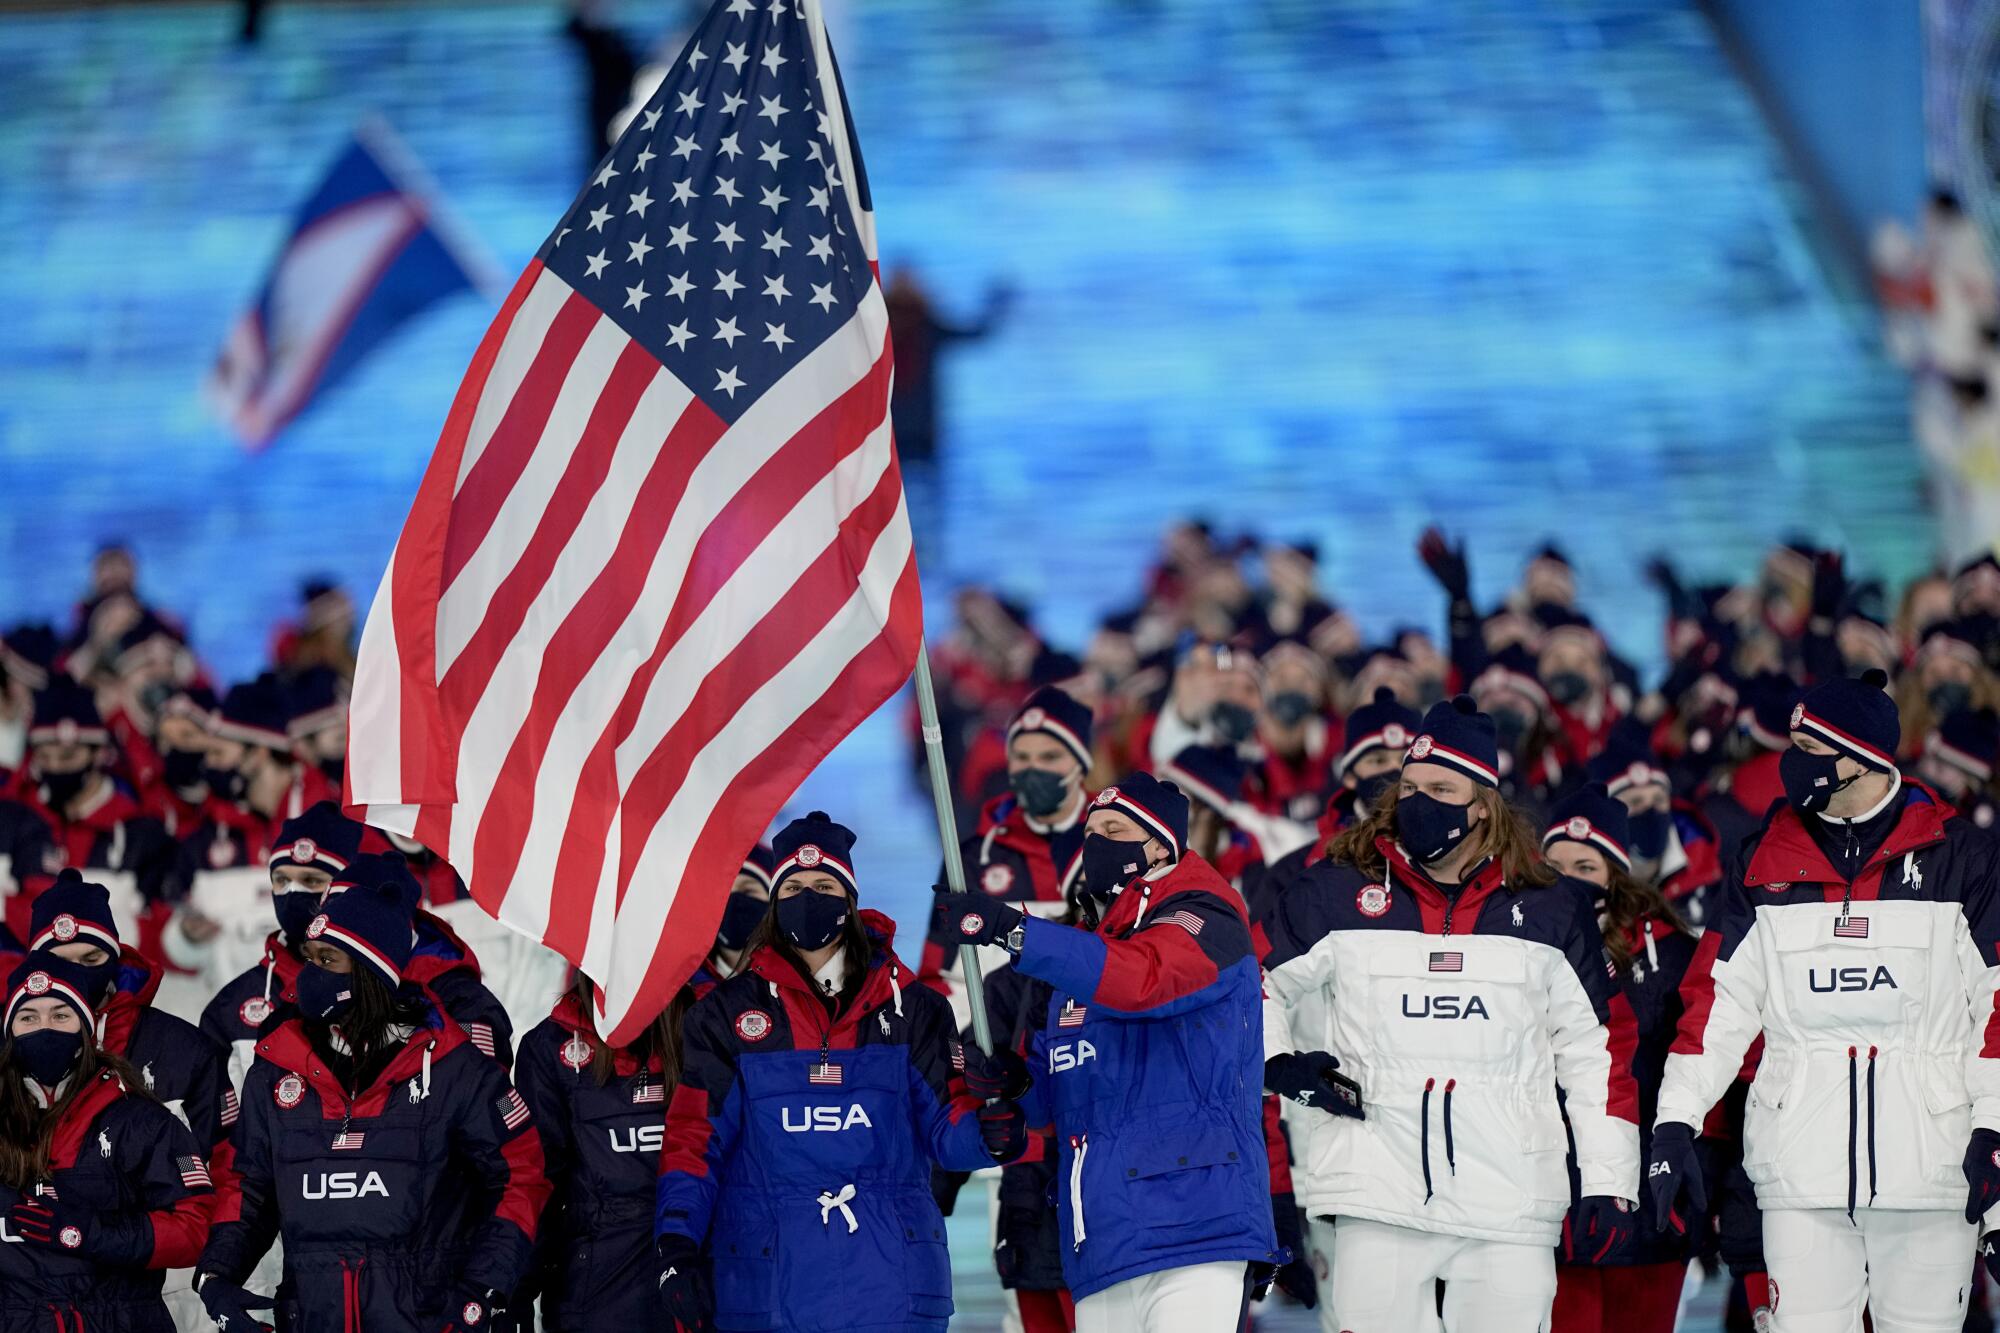 Brittany Bowe and John Shuster lead their team in during the opening ceremony of the 2022 Winter Olympics